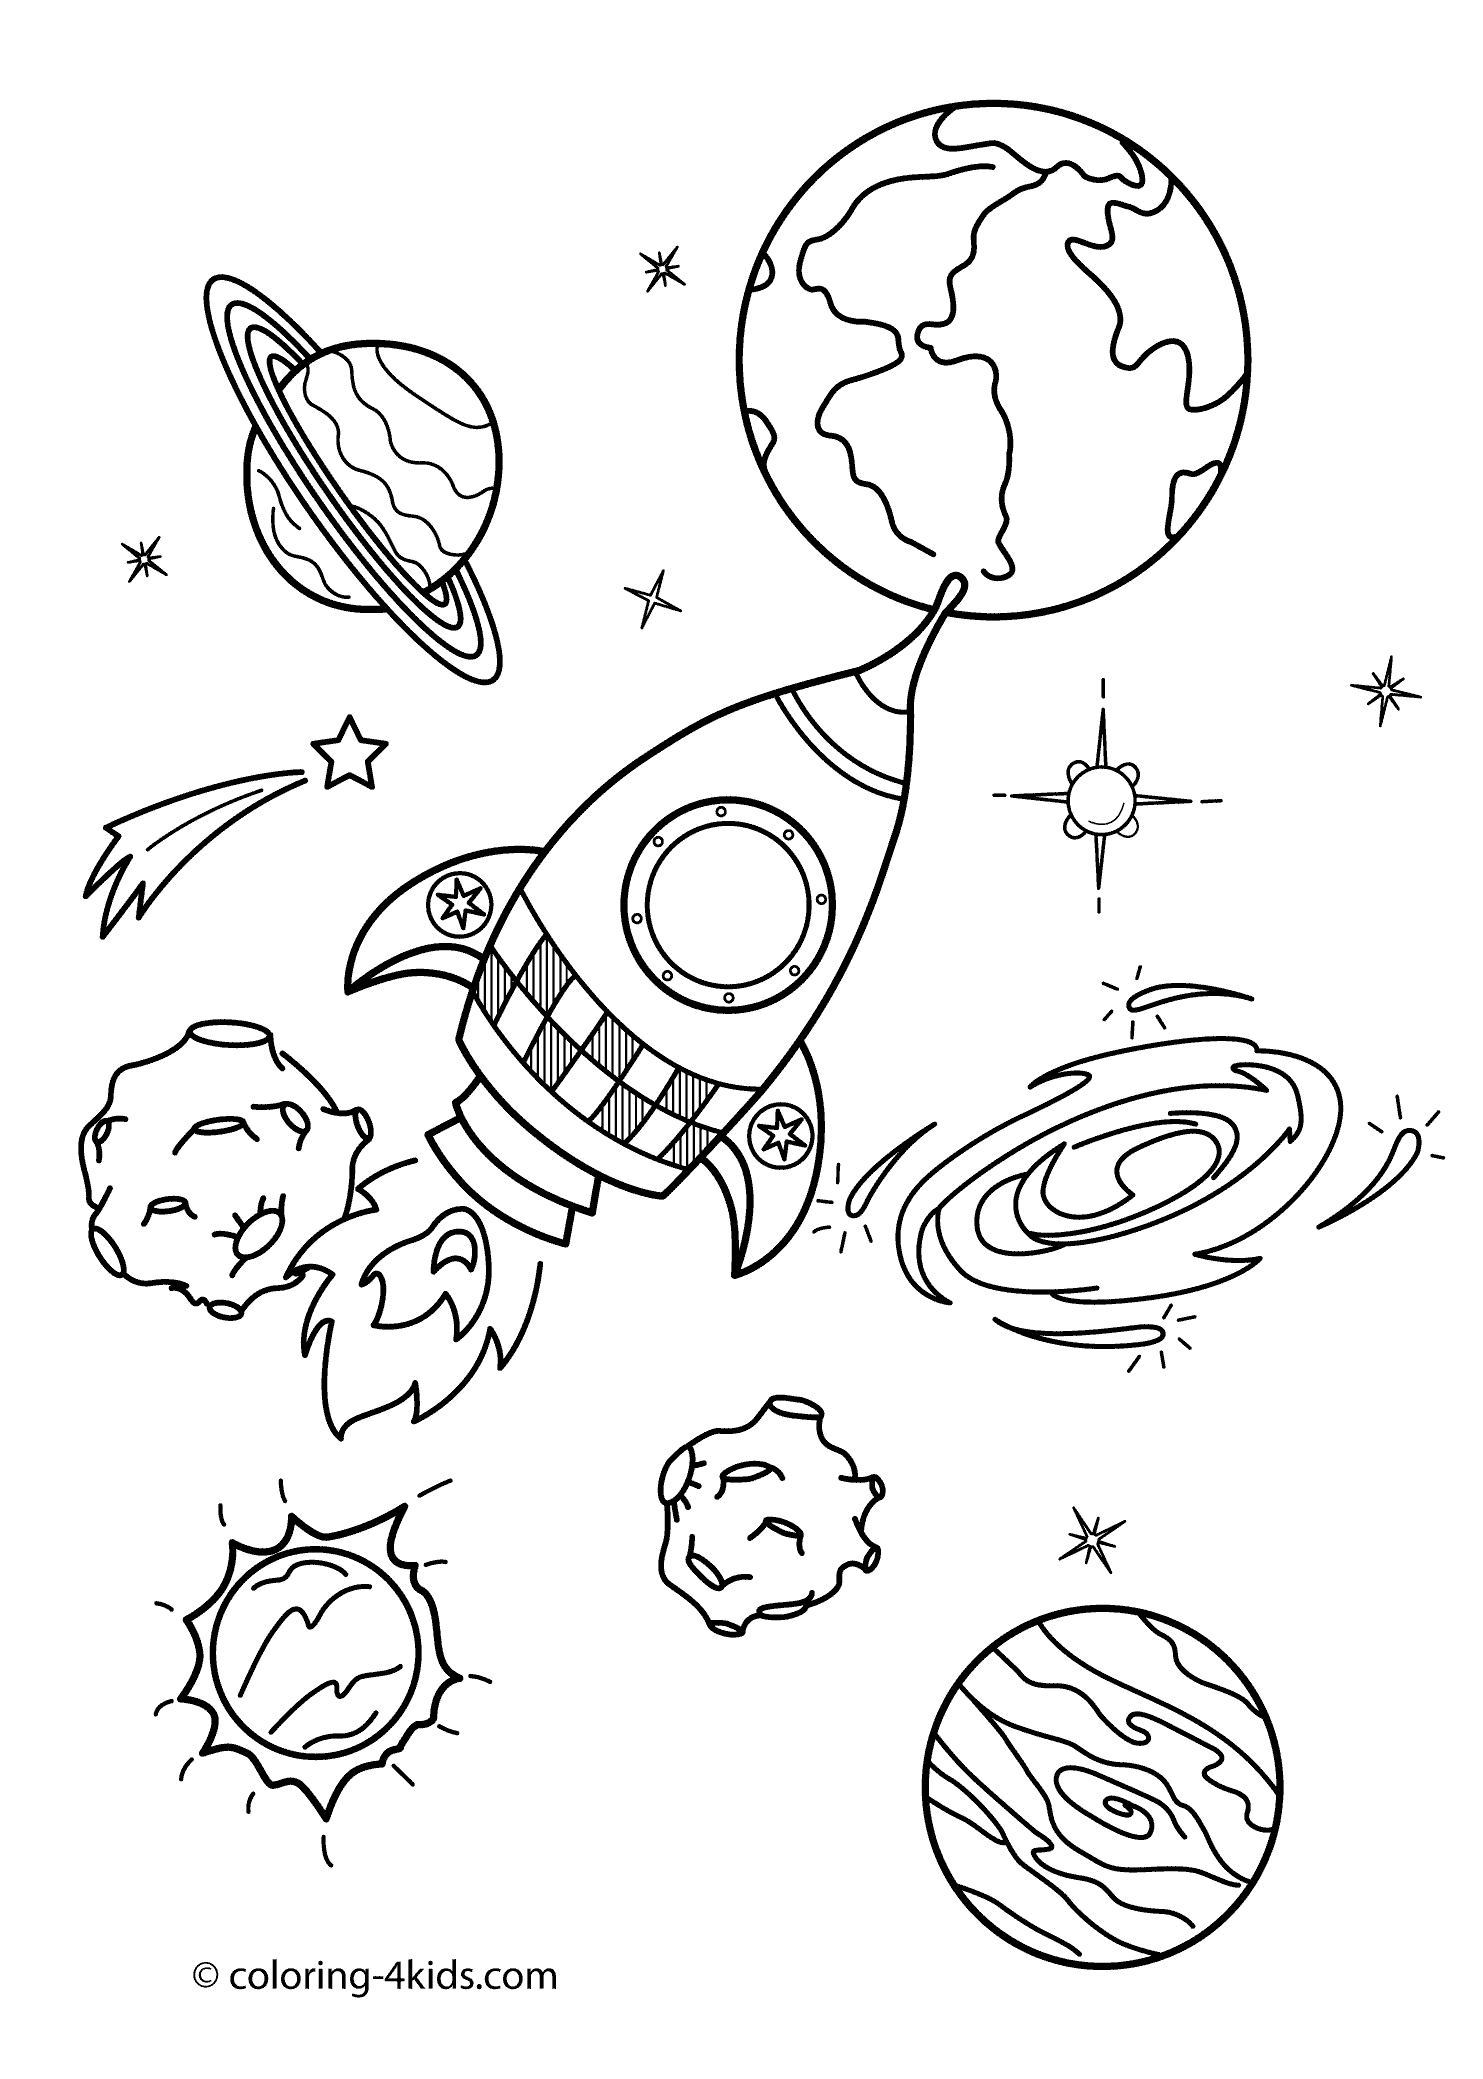 Printable Outer Space Coloring Pages - Printable World Holiday